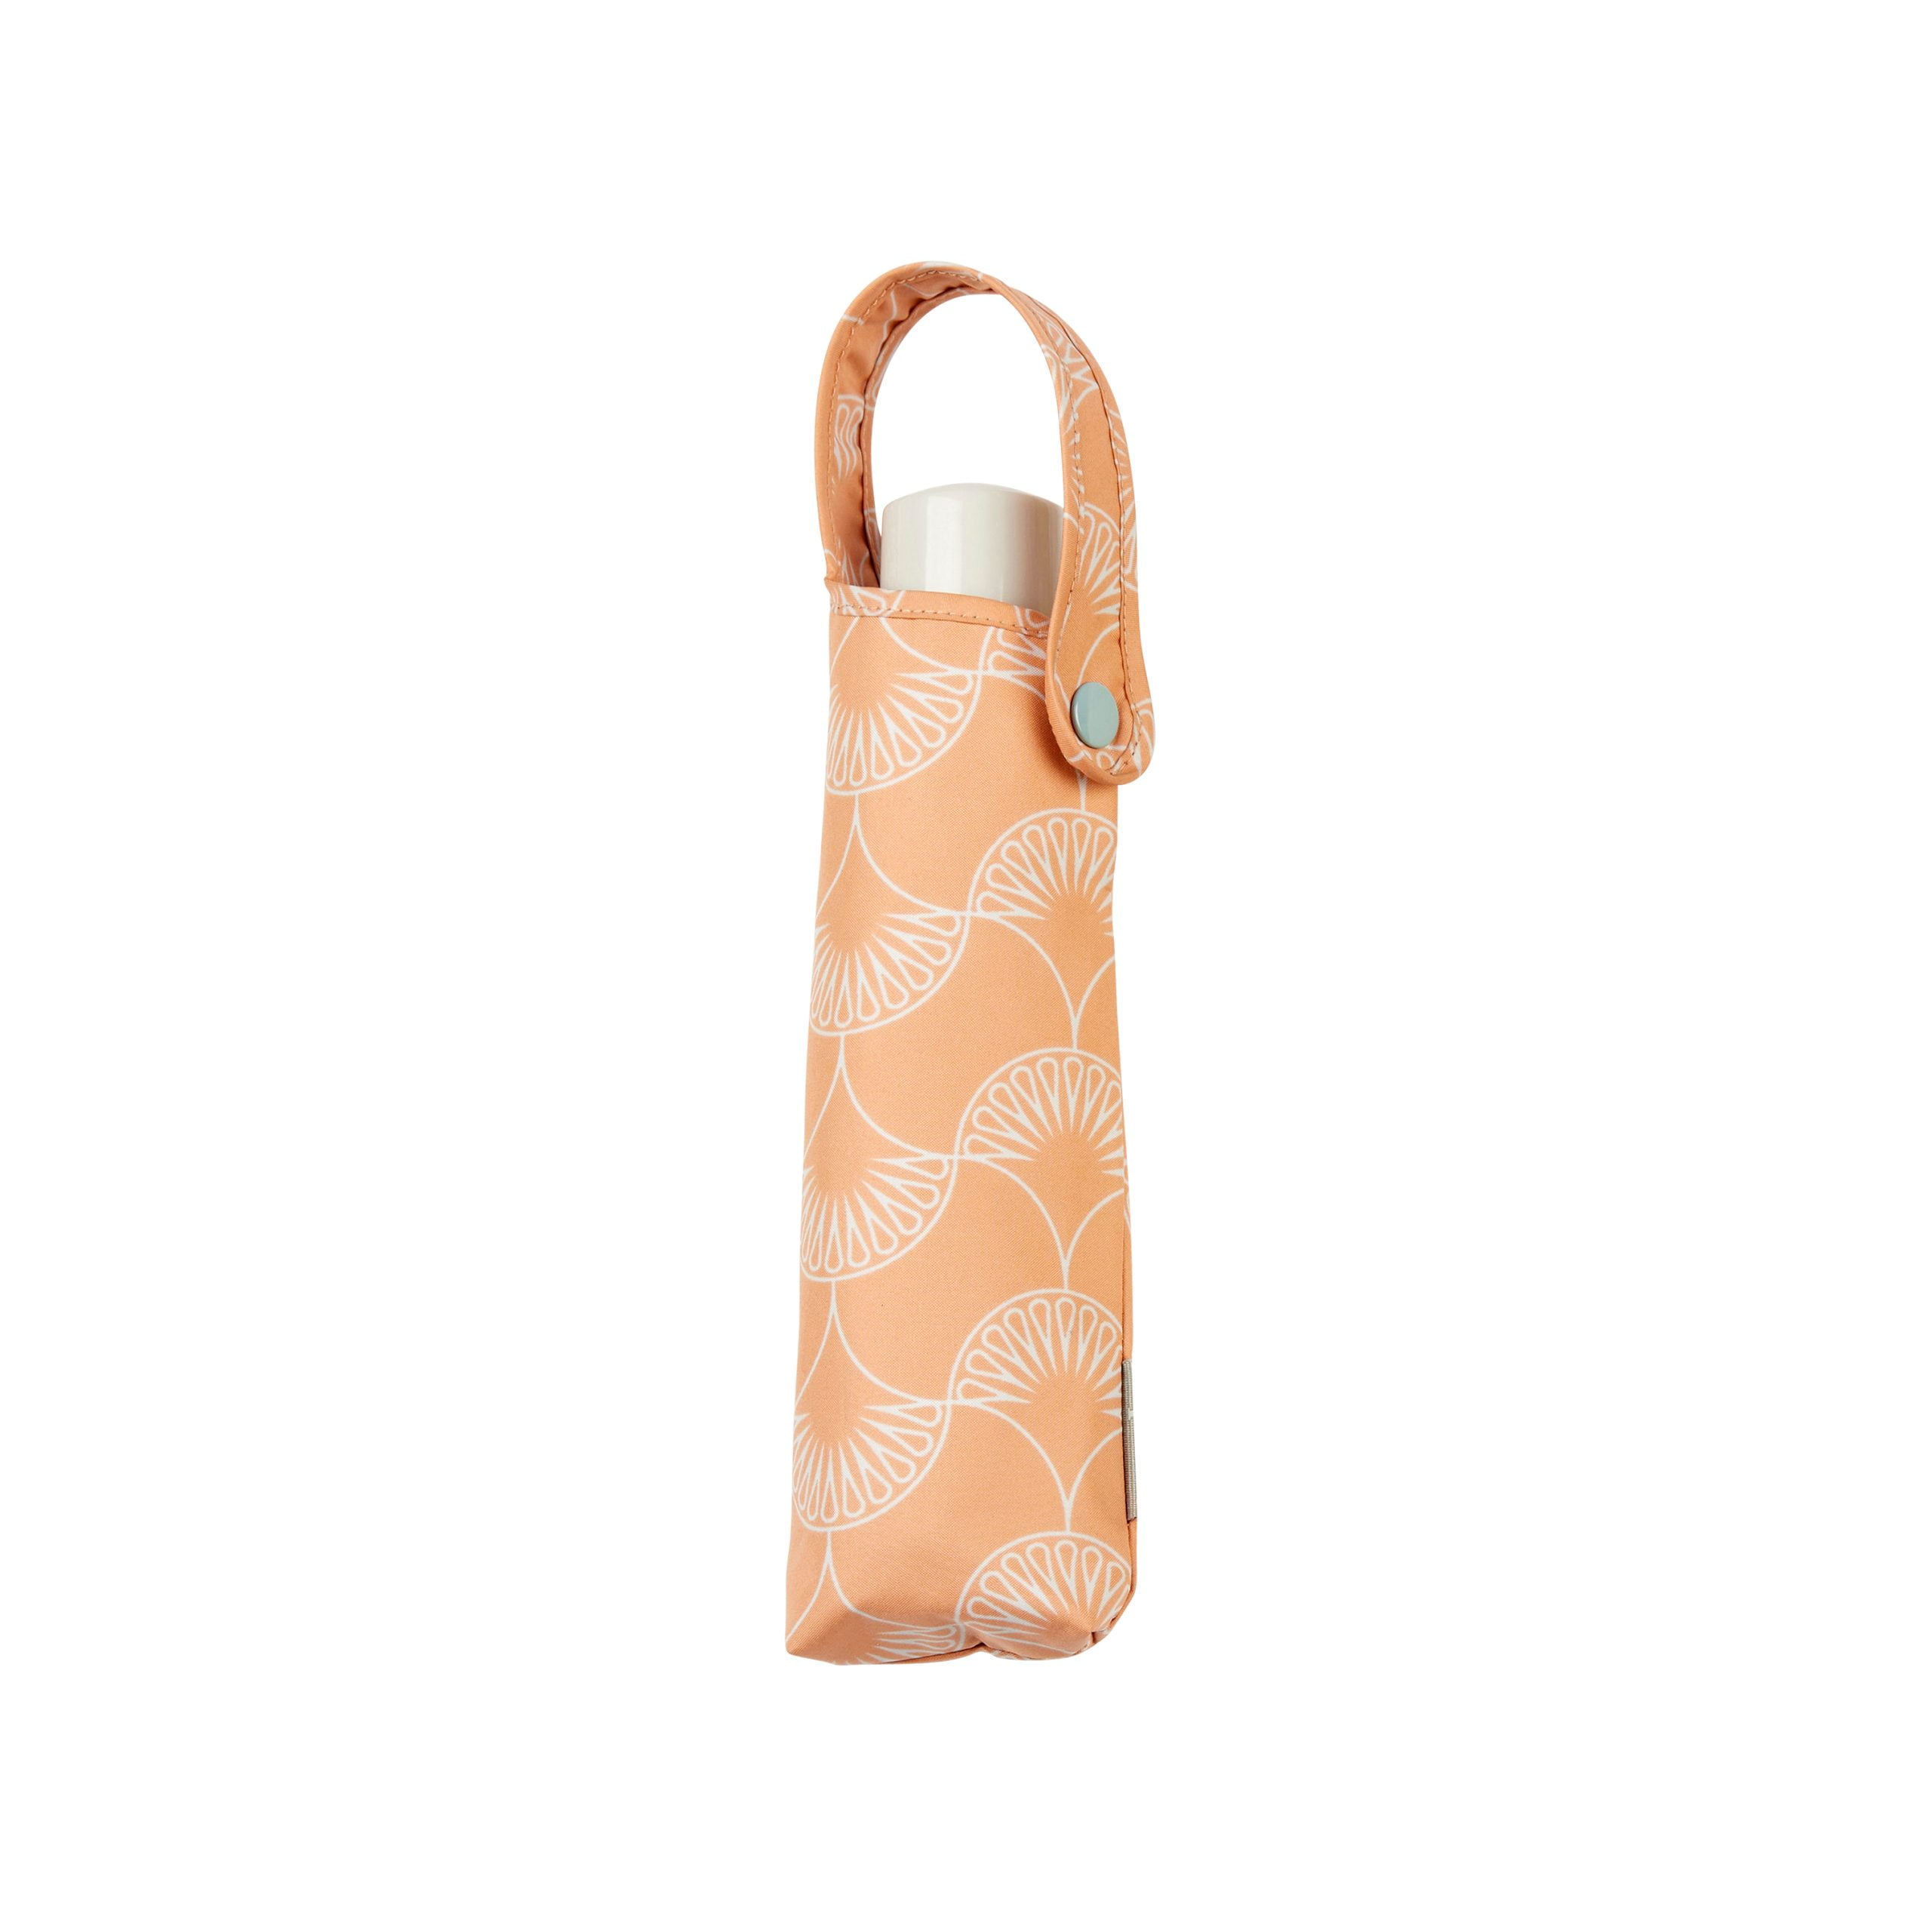 Ladies UV Compact Umbrella - peach patterned - with carry sleeve